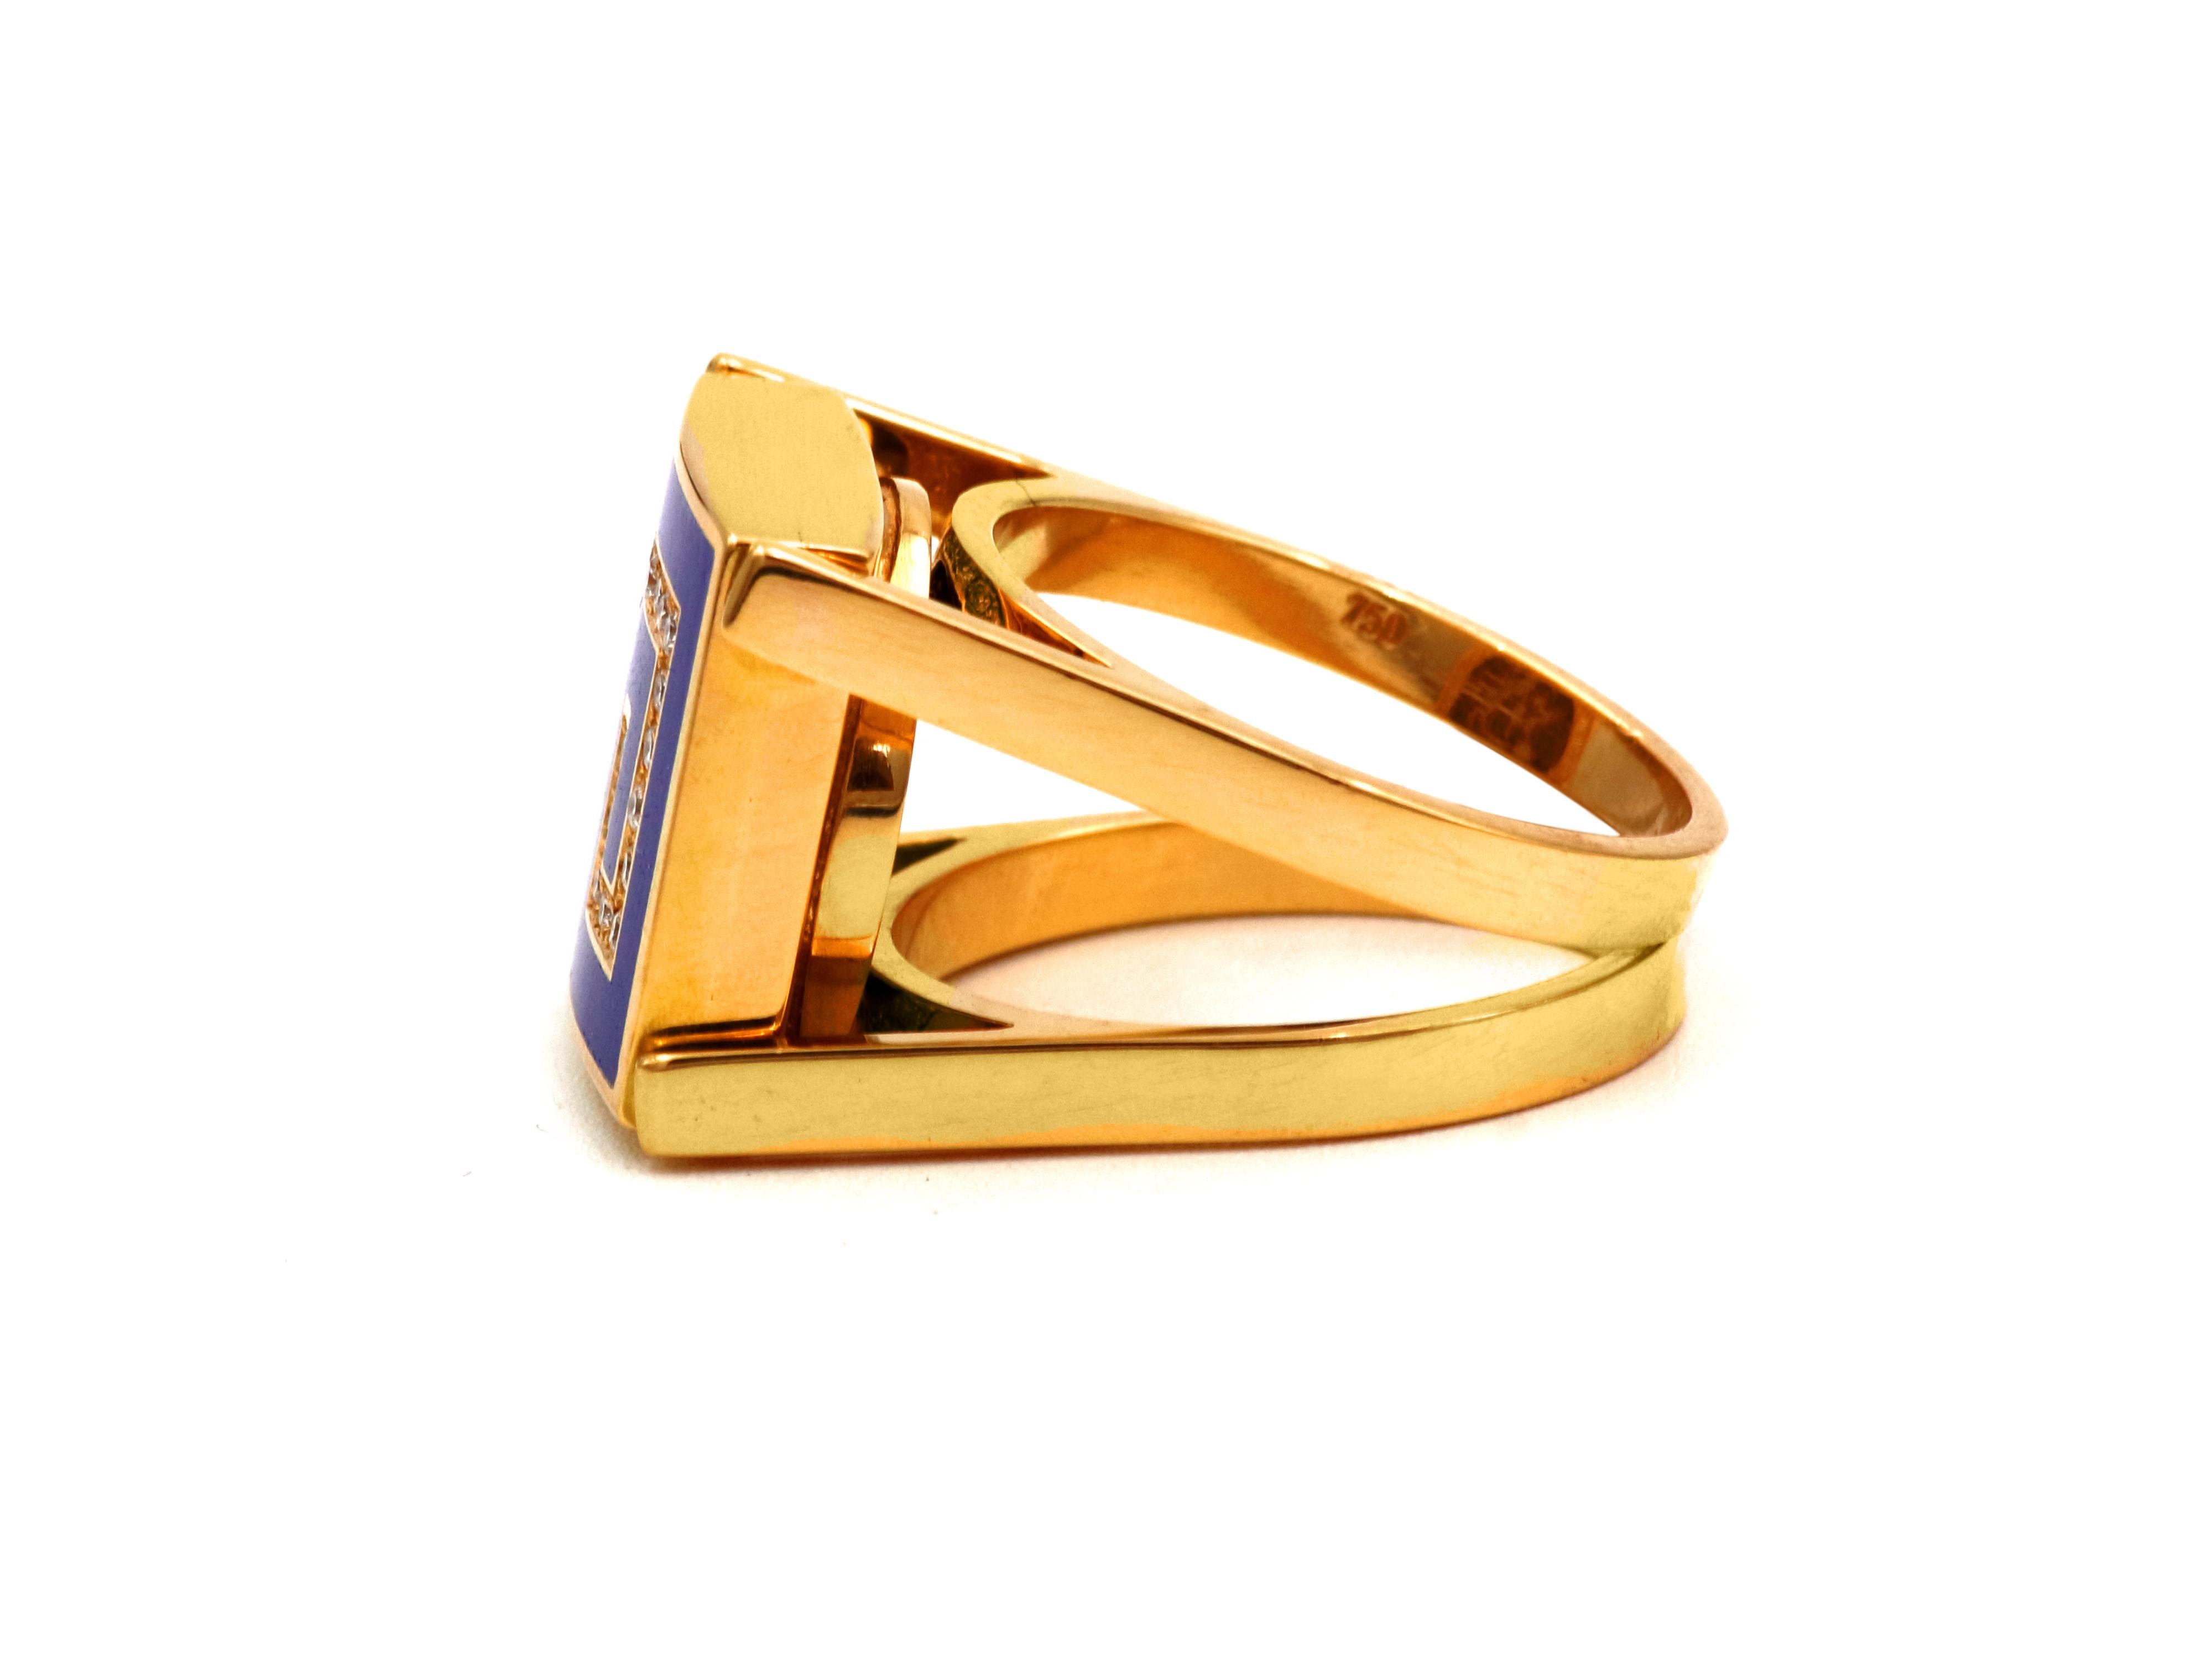 Perhaps the most Modern edition of the Greek key with 0.52 carats natural brilliant cut diamonds. A ring with a twist of being actually two. Two bands are holding a rectangular box one side with the Greek key symbol placed with enamel and toped with